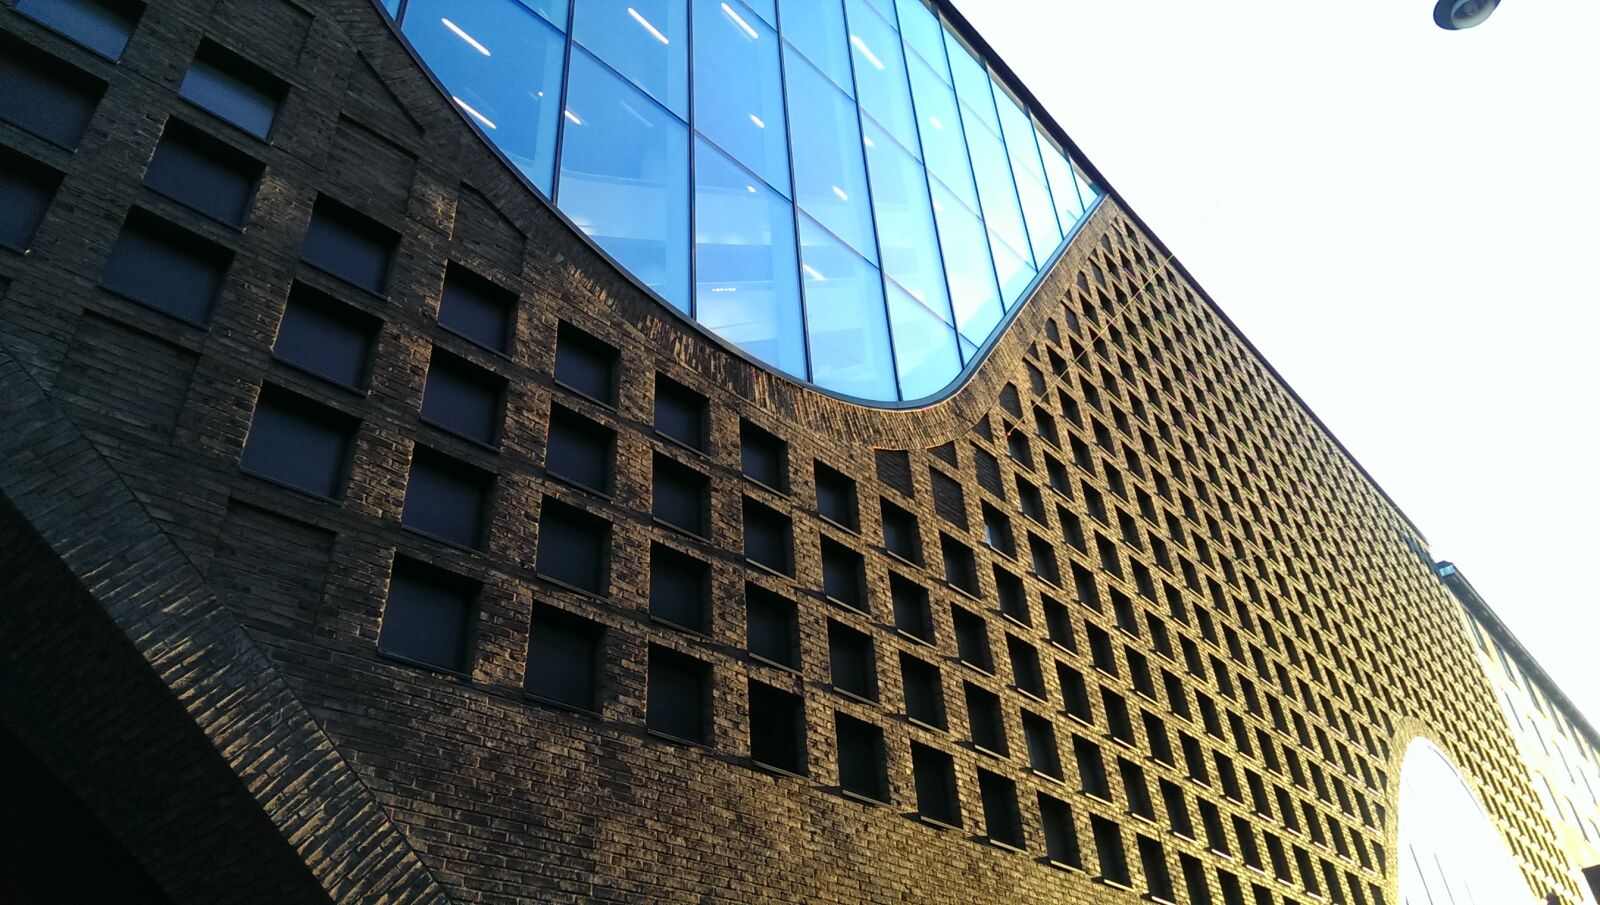 HTC ONE sample photo. Architecture, building, glass, perspective photography